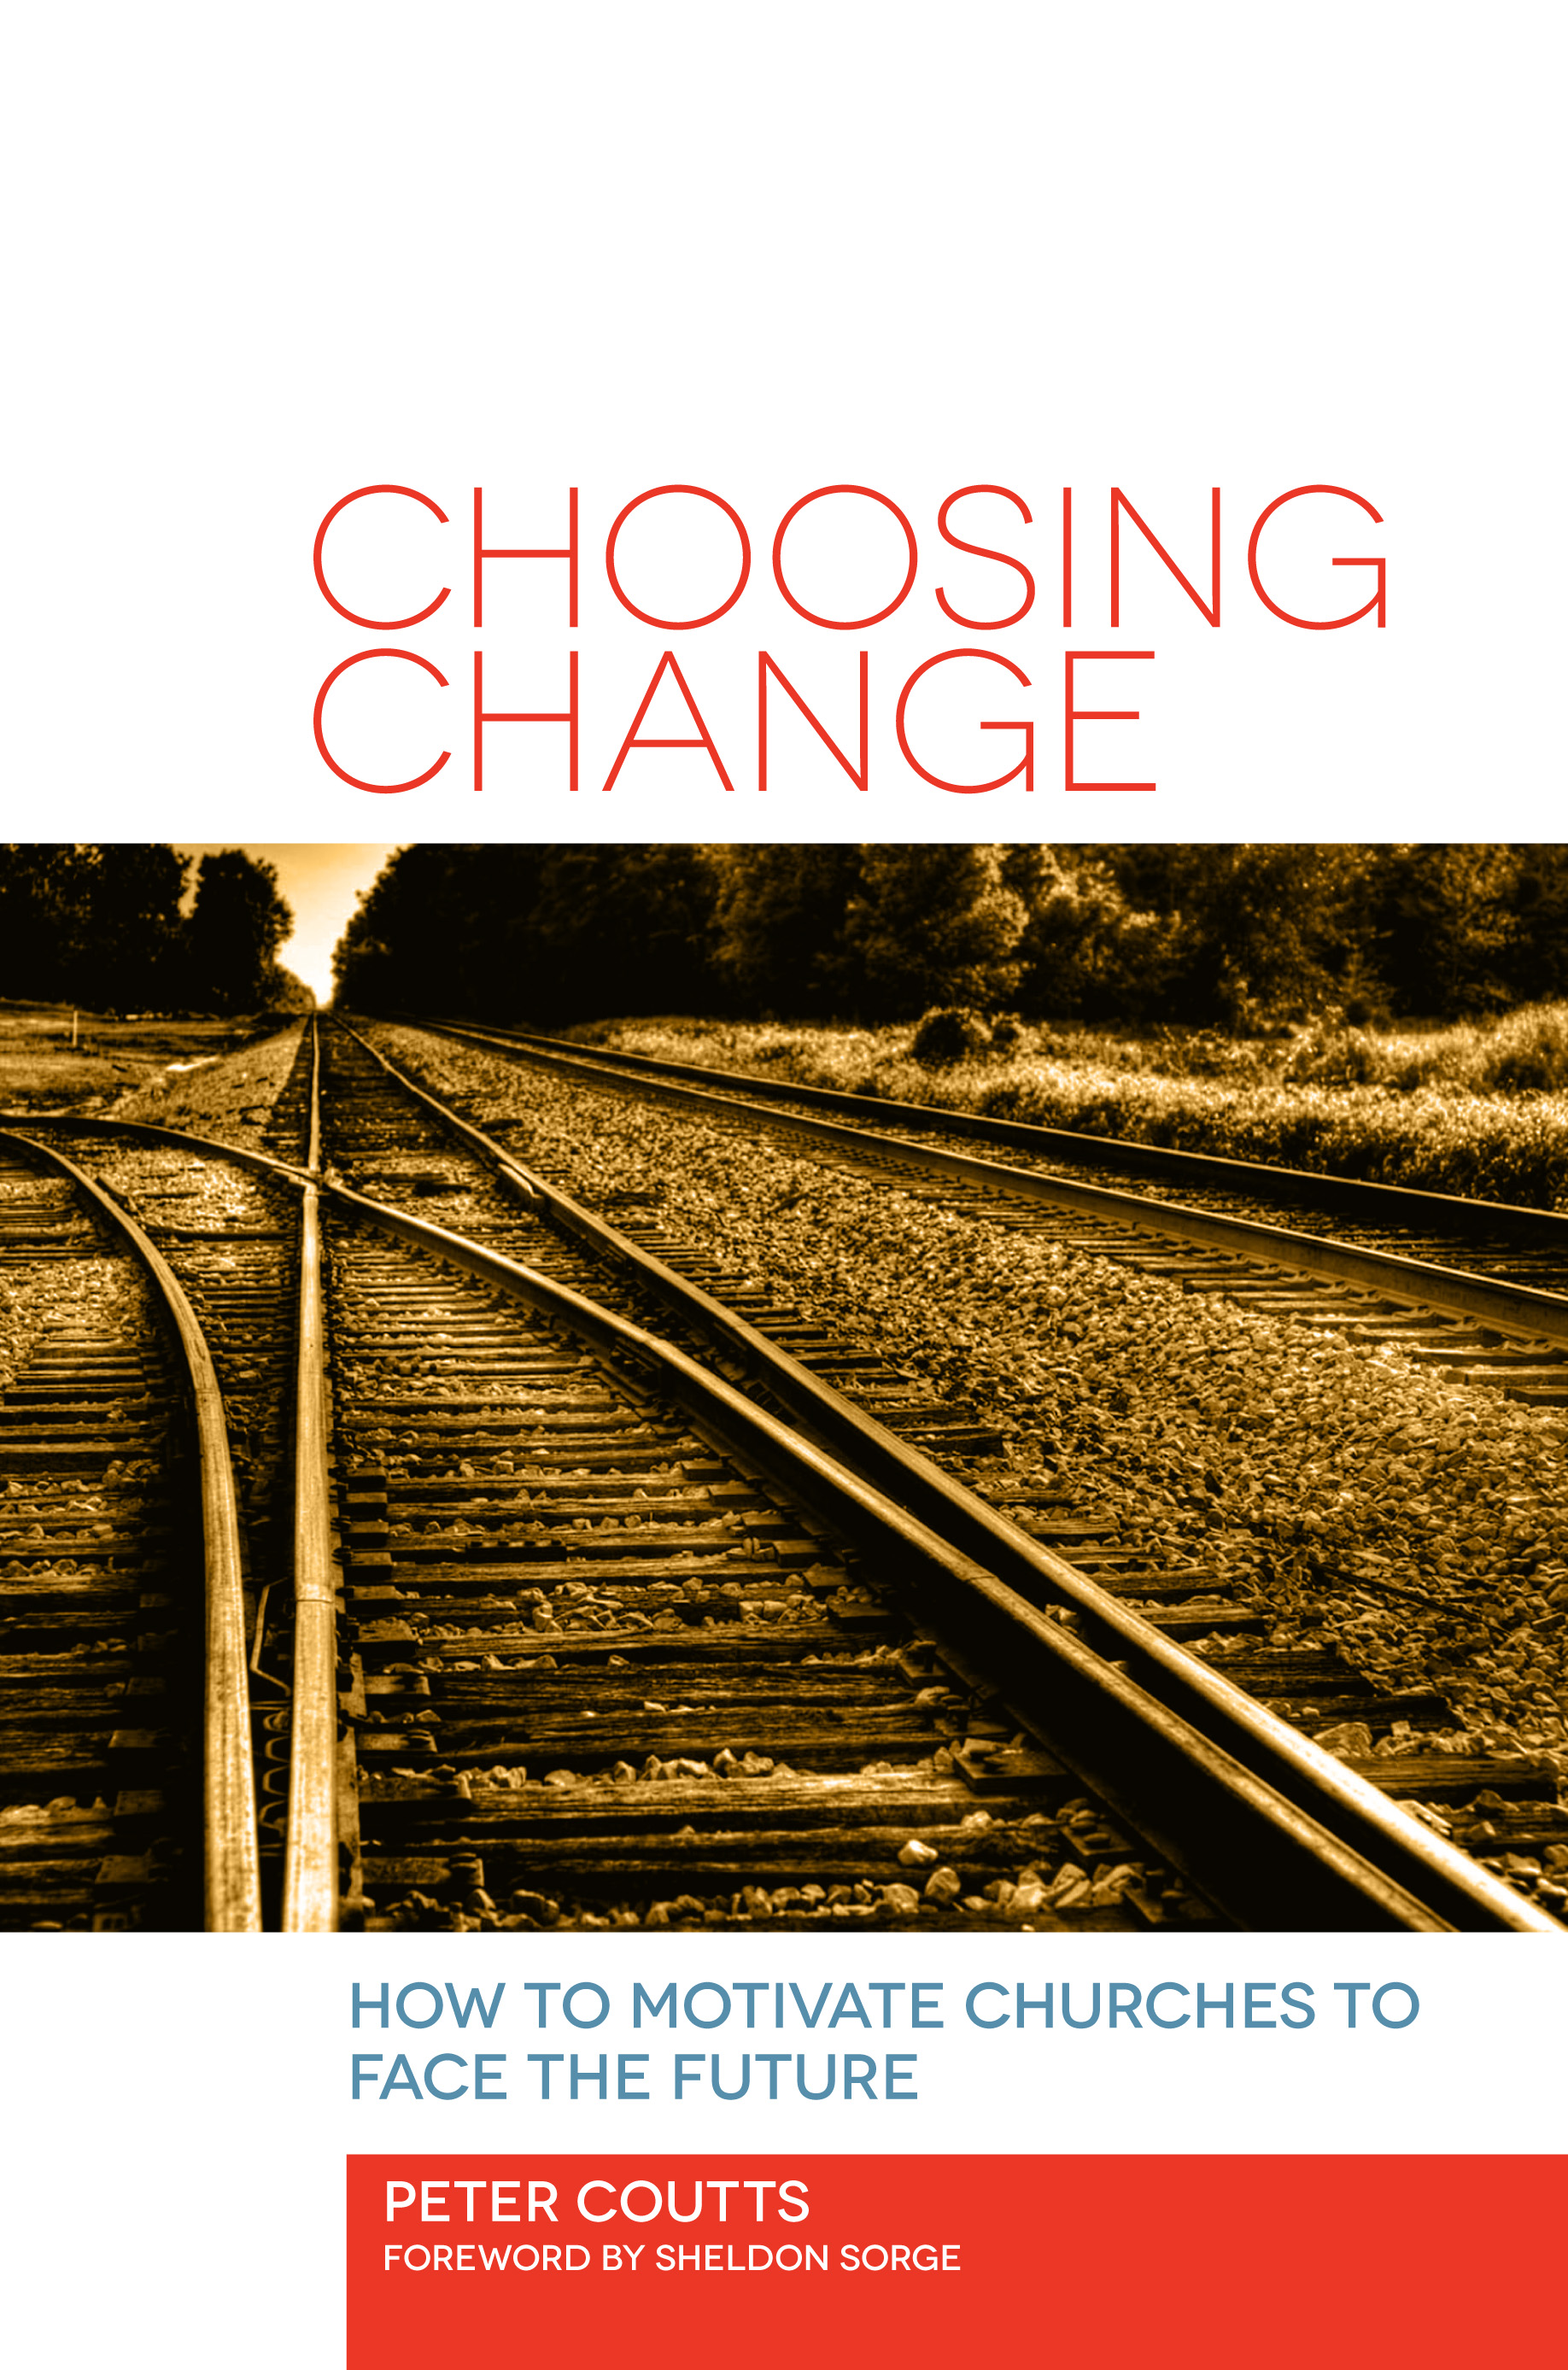 Choosing Change: How to Motivate Churches to Face the Future